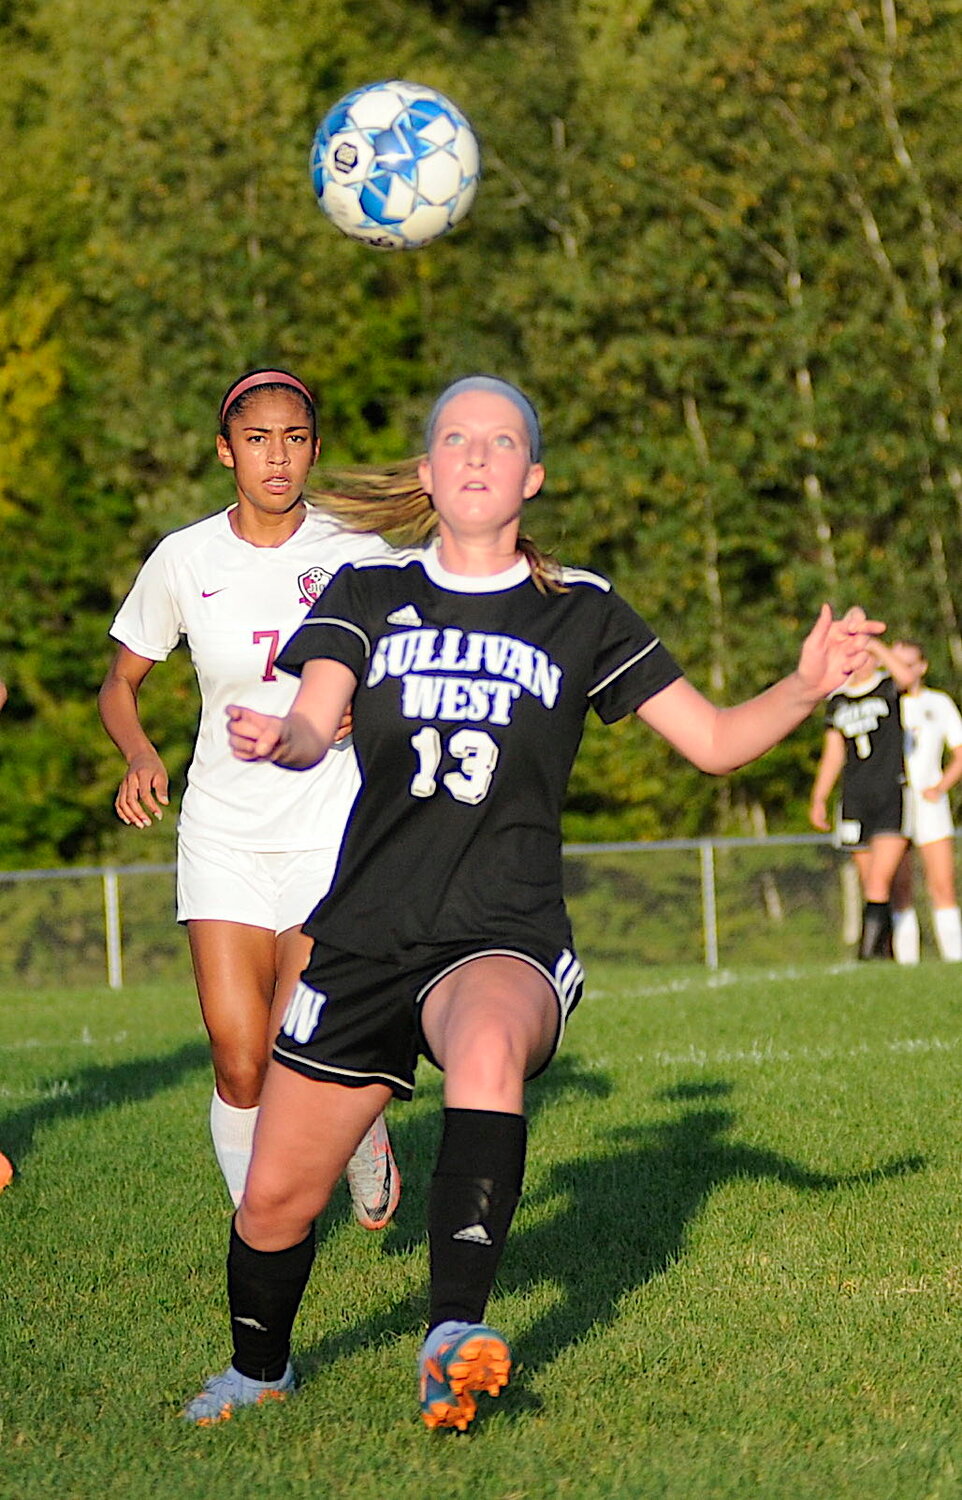 Heads-up soccer. Sullivan West’s Sophie Flynn gets her noggin in the game as O’Neill’s Jael-Marie Guy closes in on the action.